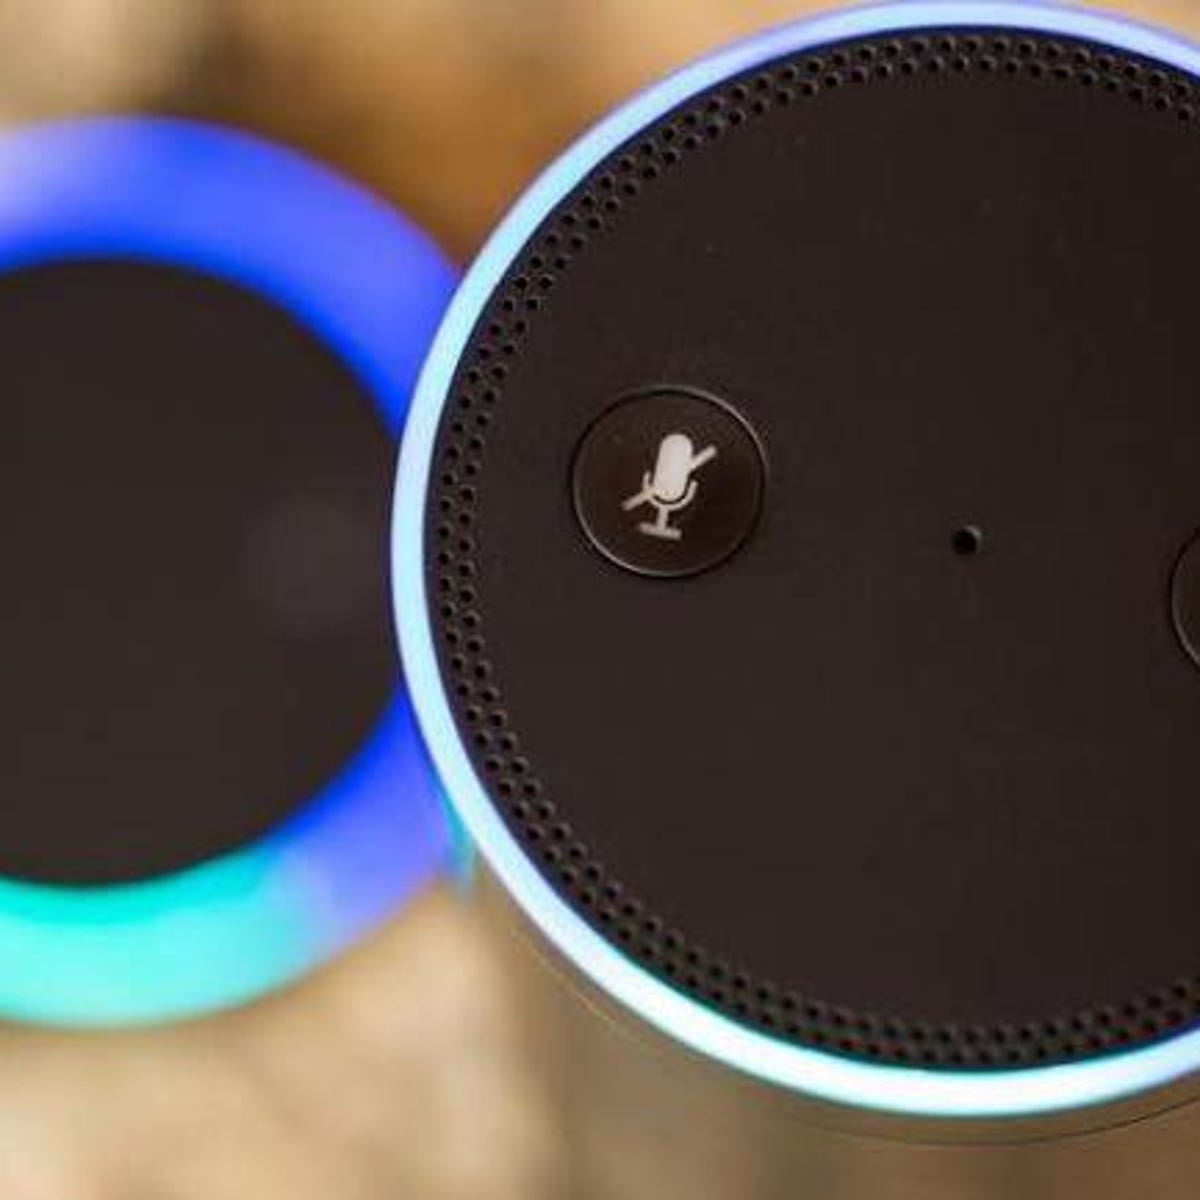 opens Echo microphone tech to third-party Alexa devices